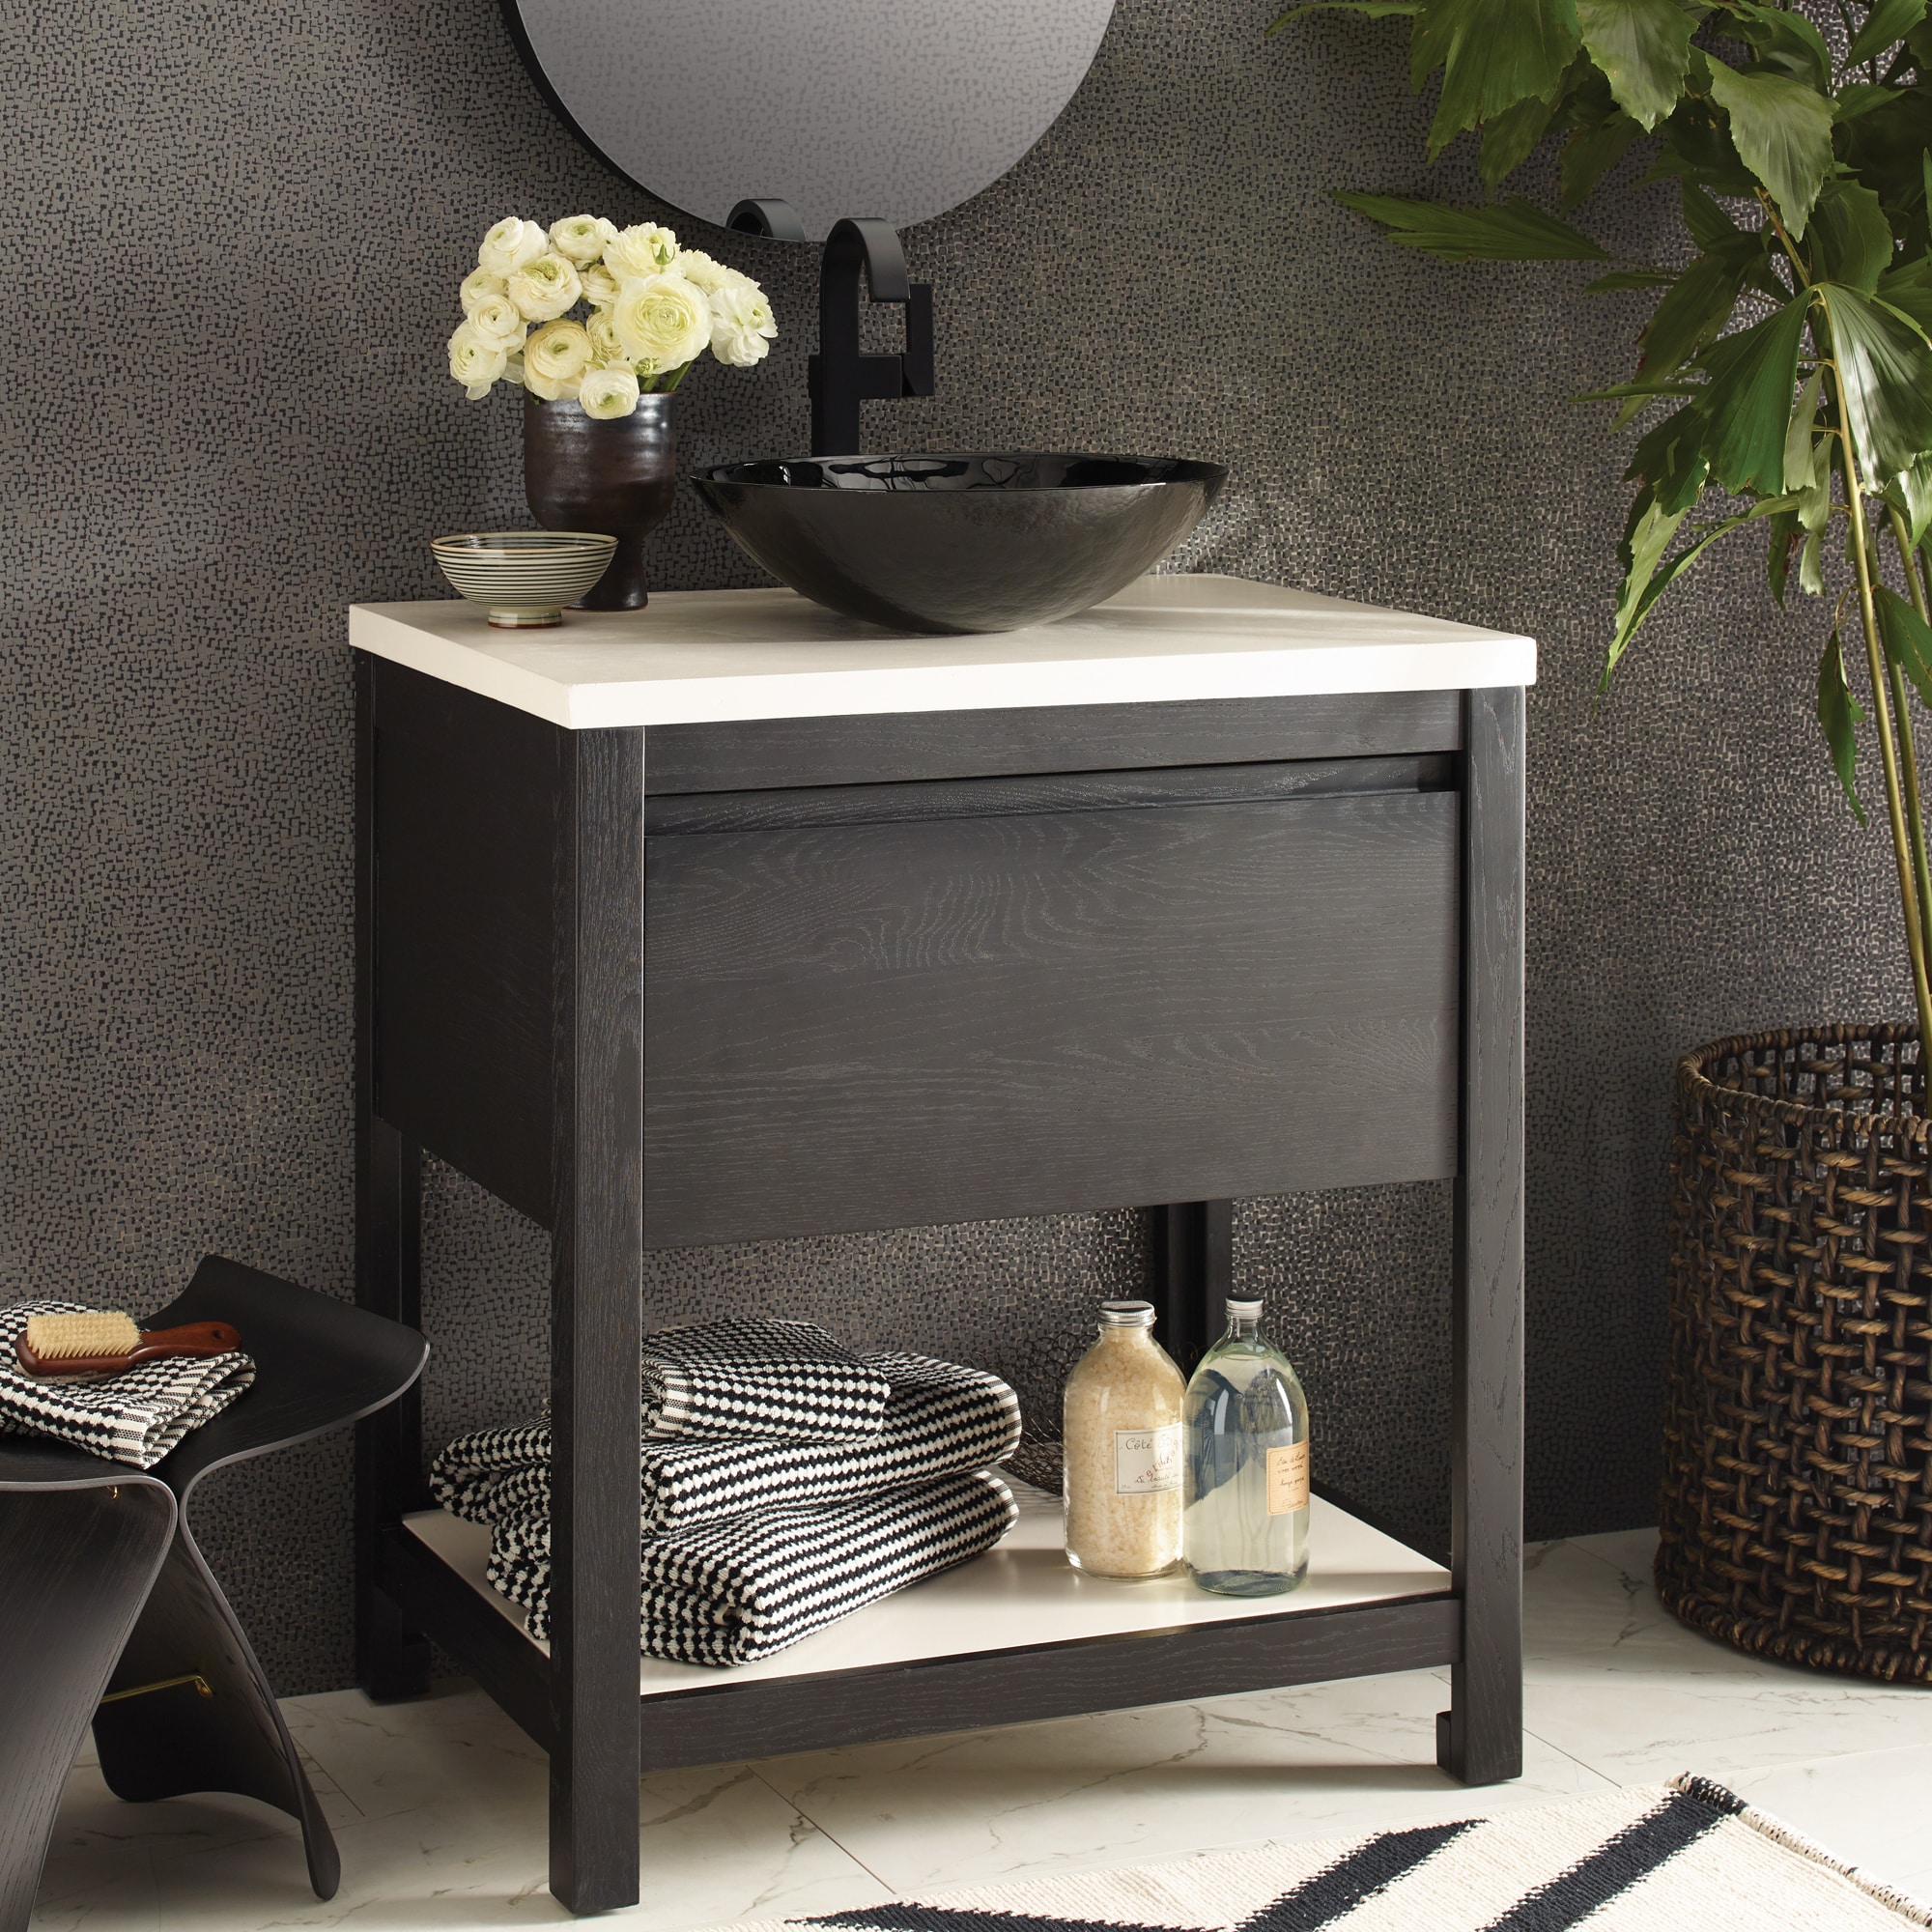 Native Trails 30 inch Solace Freestanding Vanity Base in Midnight Oak with Pearl Shelf, VNO308-P